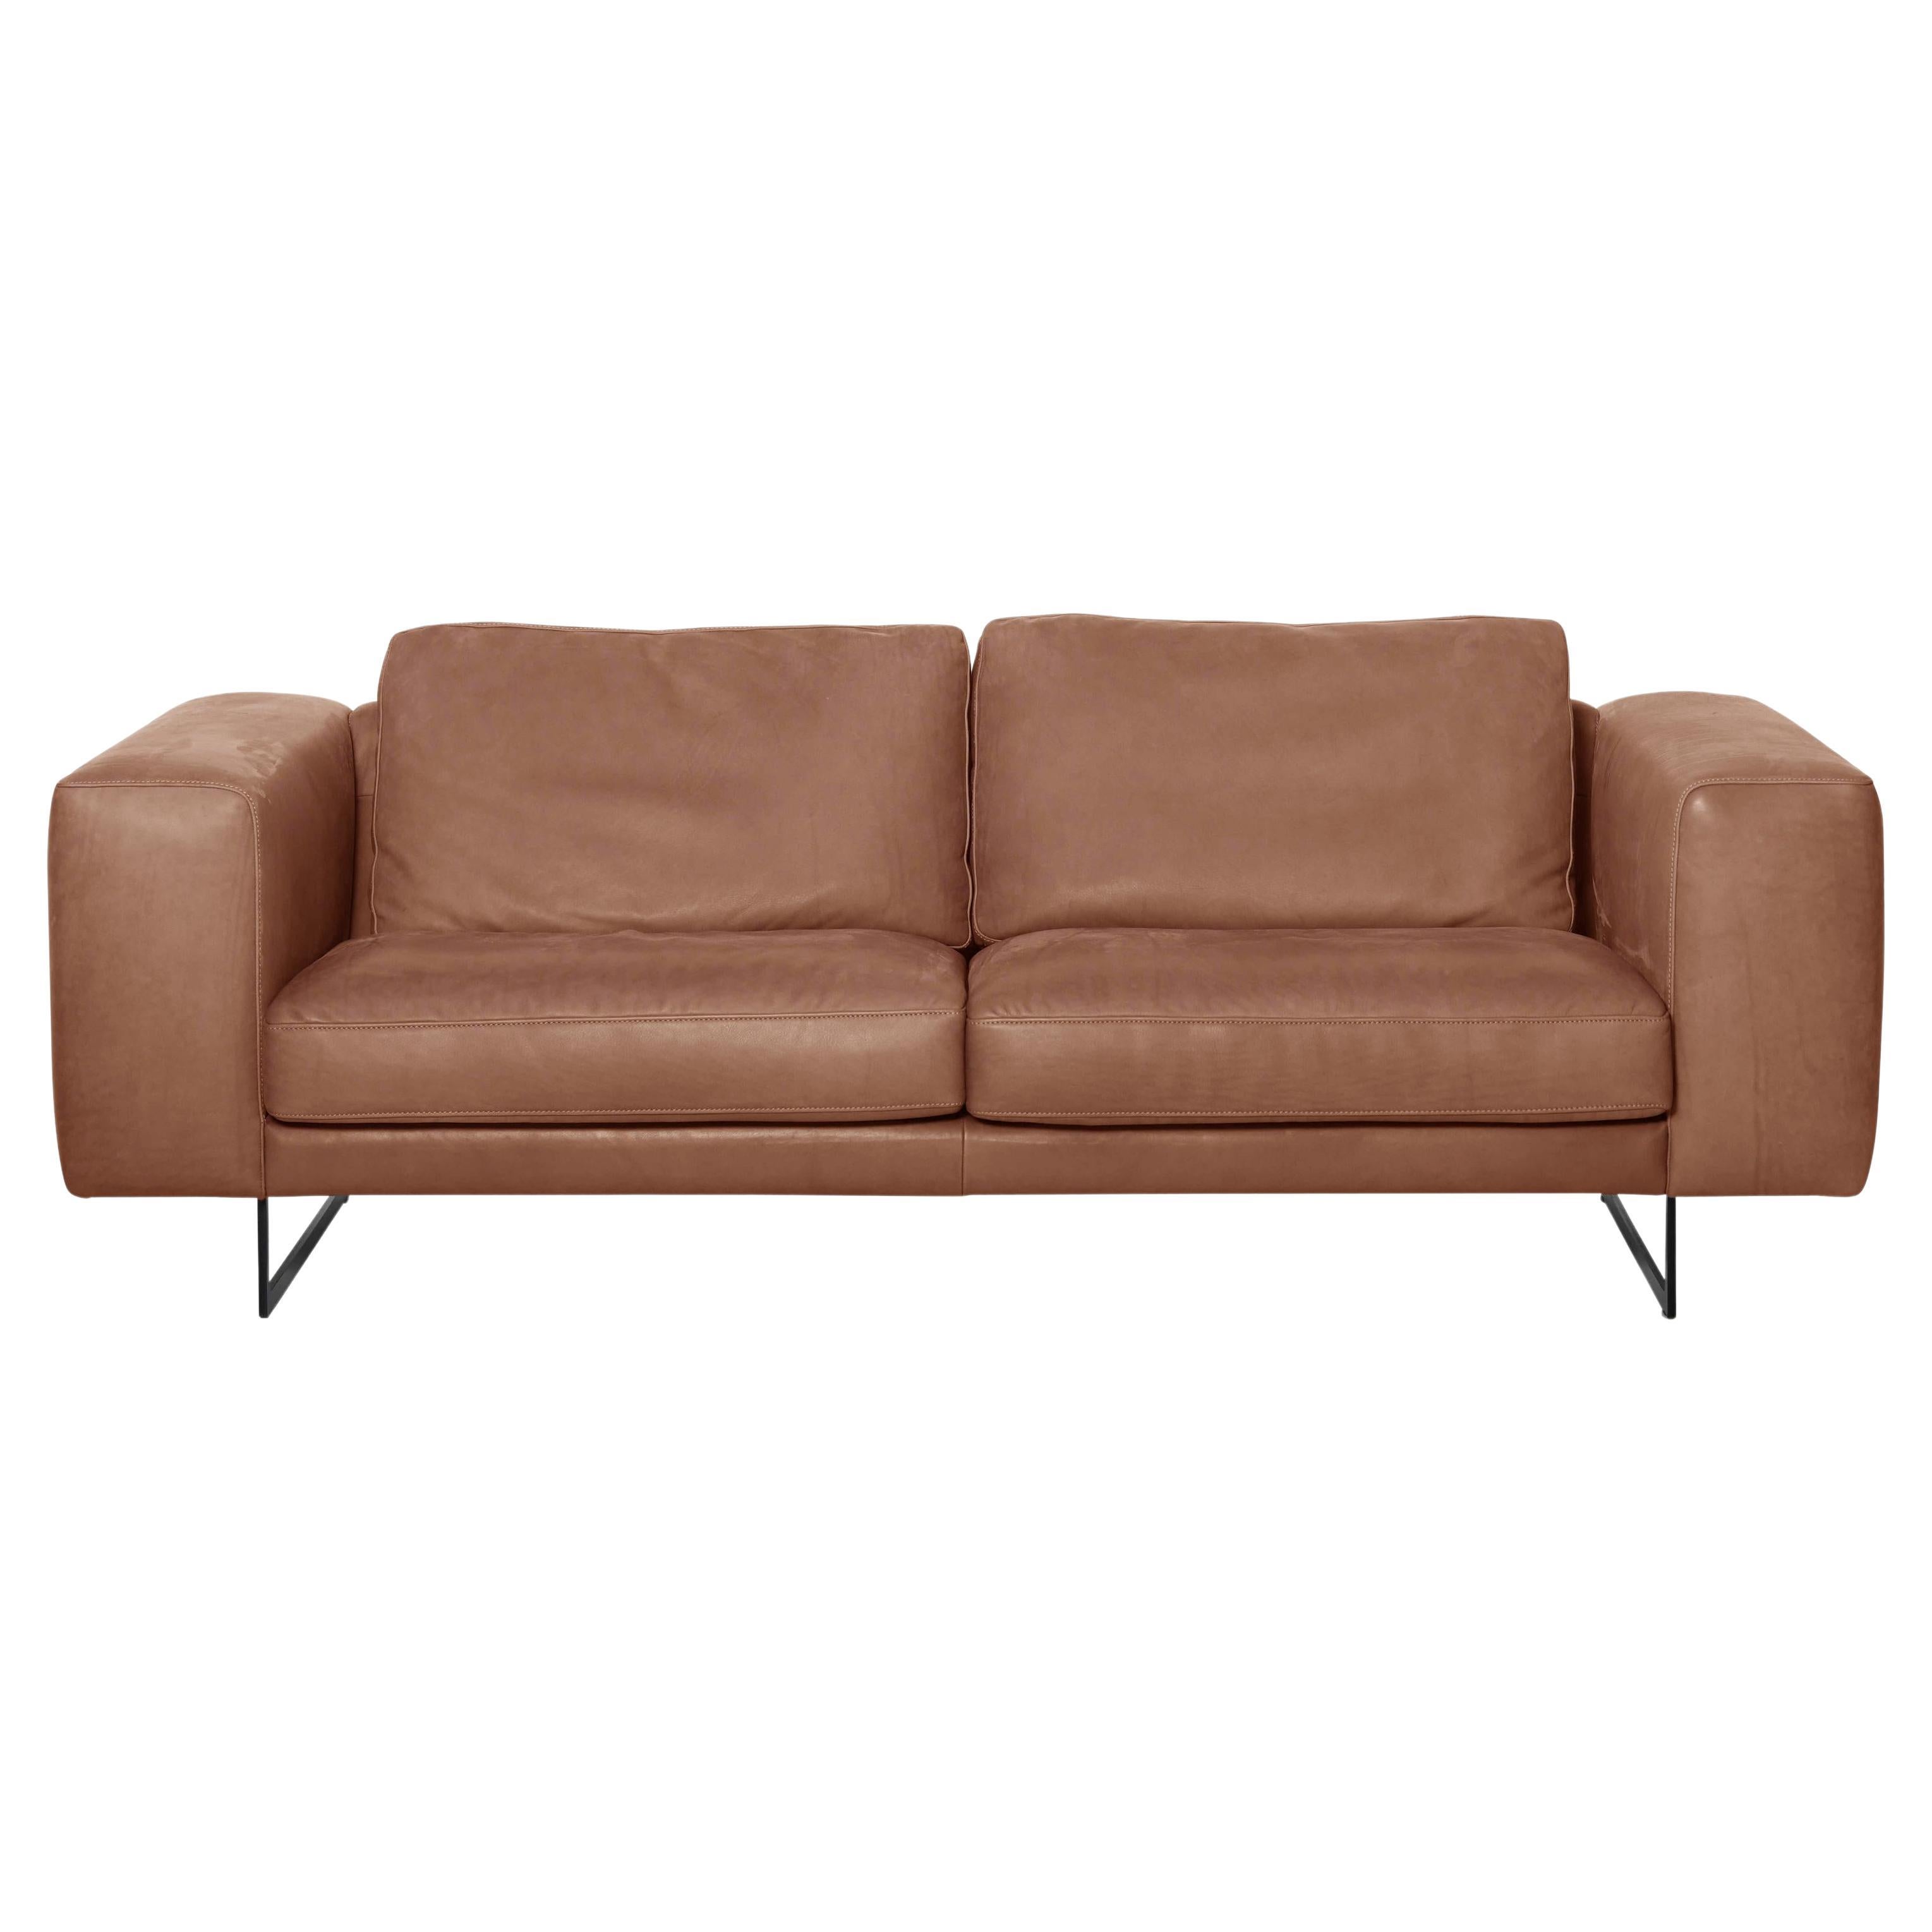 De Sede DS-748 Large Two-Seat Sofa in Nougat Upholstery by Claudio Bellini